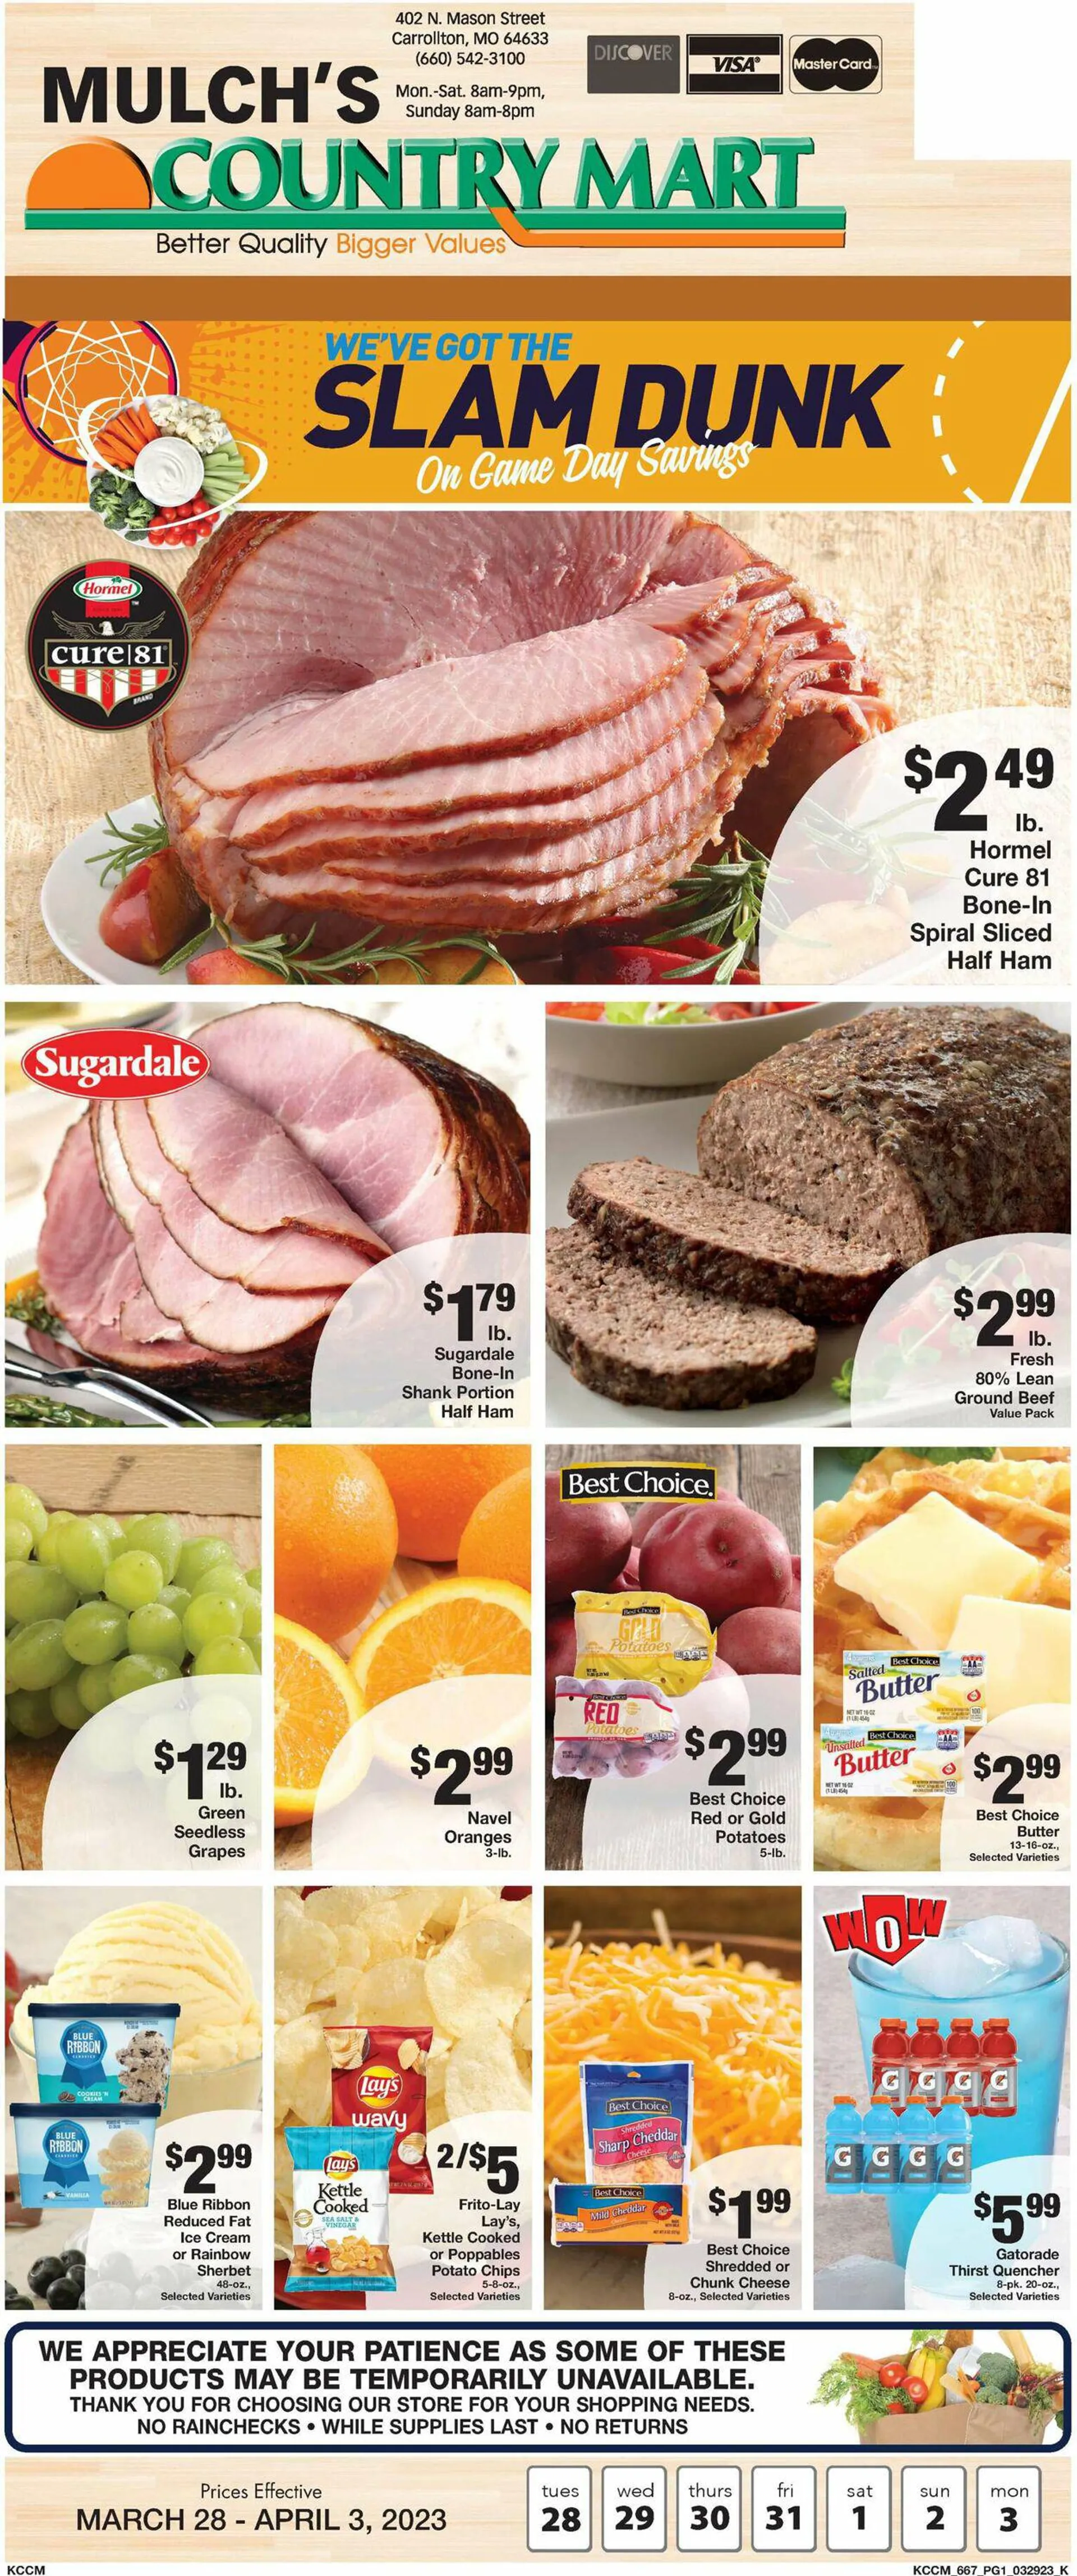 Country Mart Current weekly ad - 1